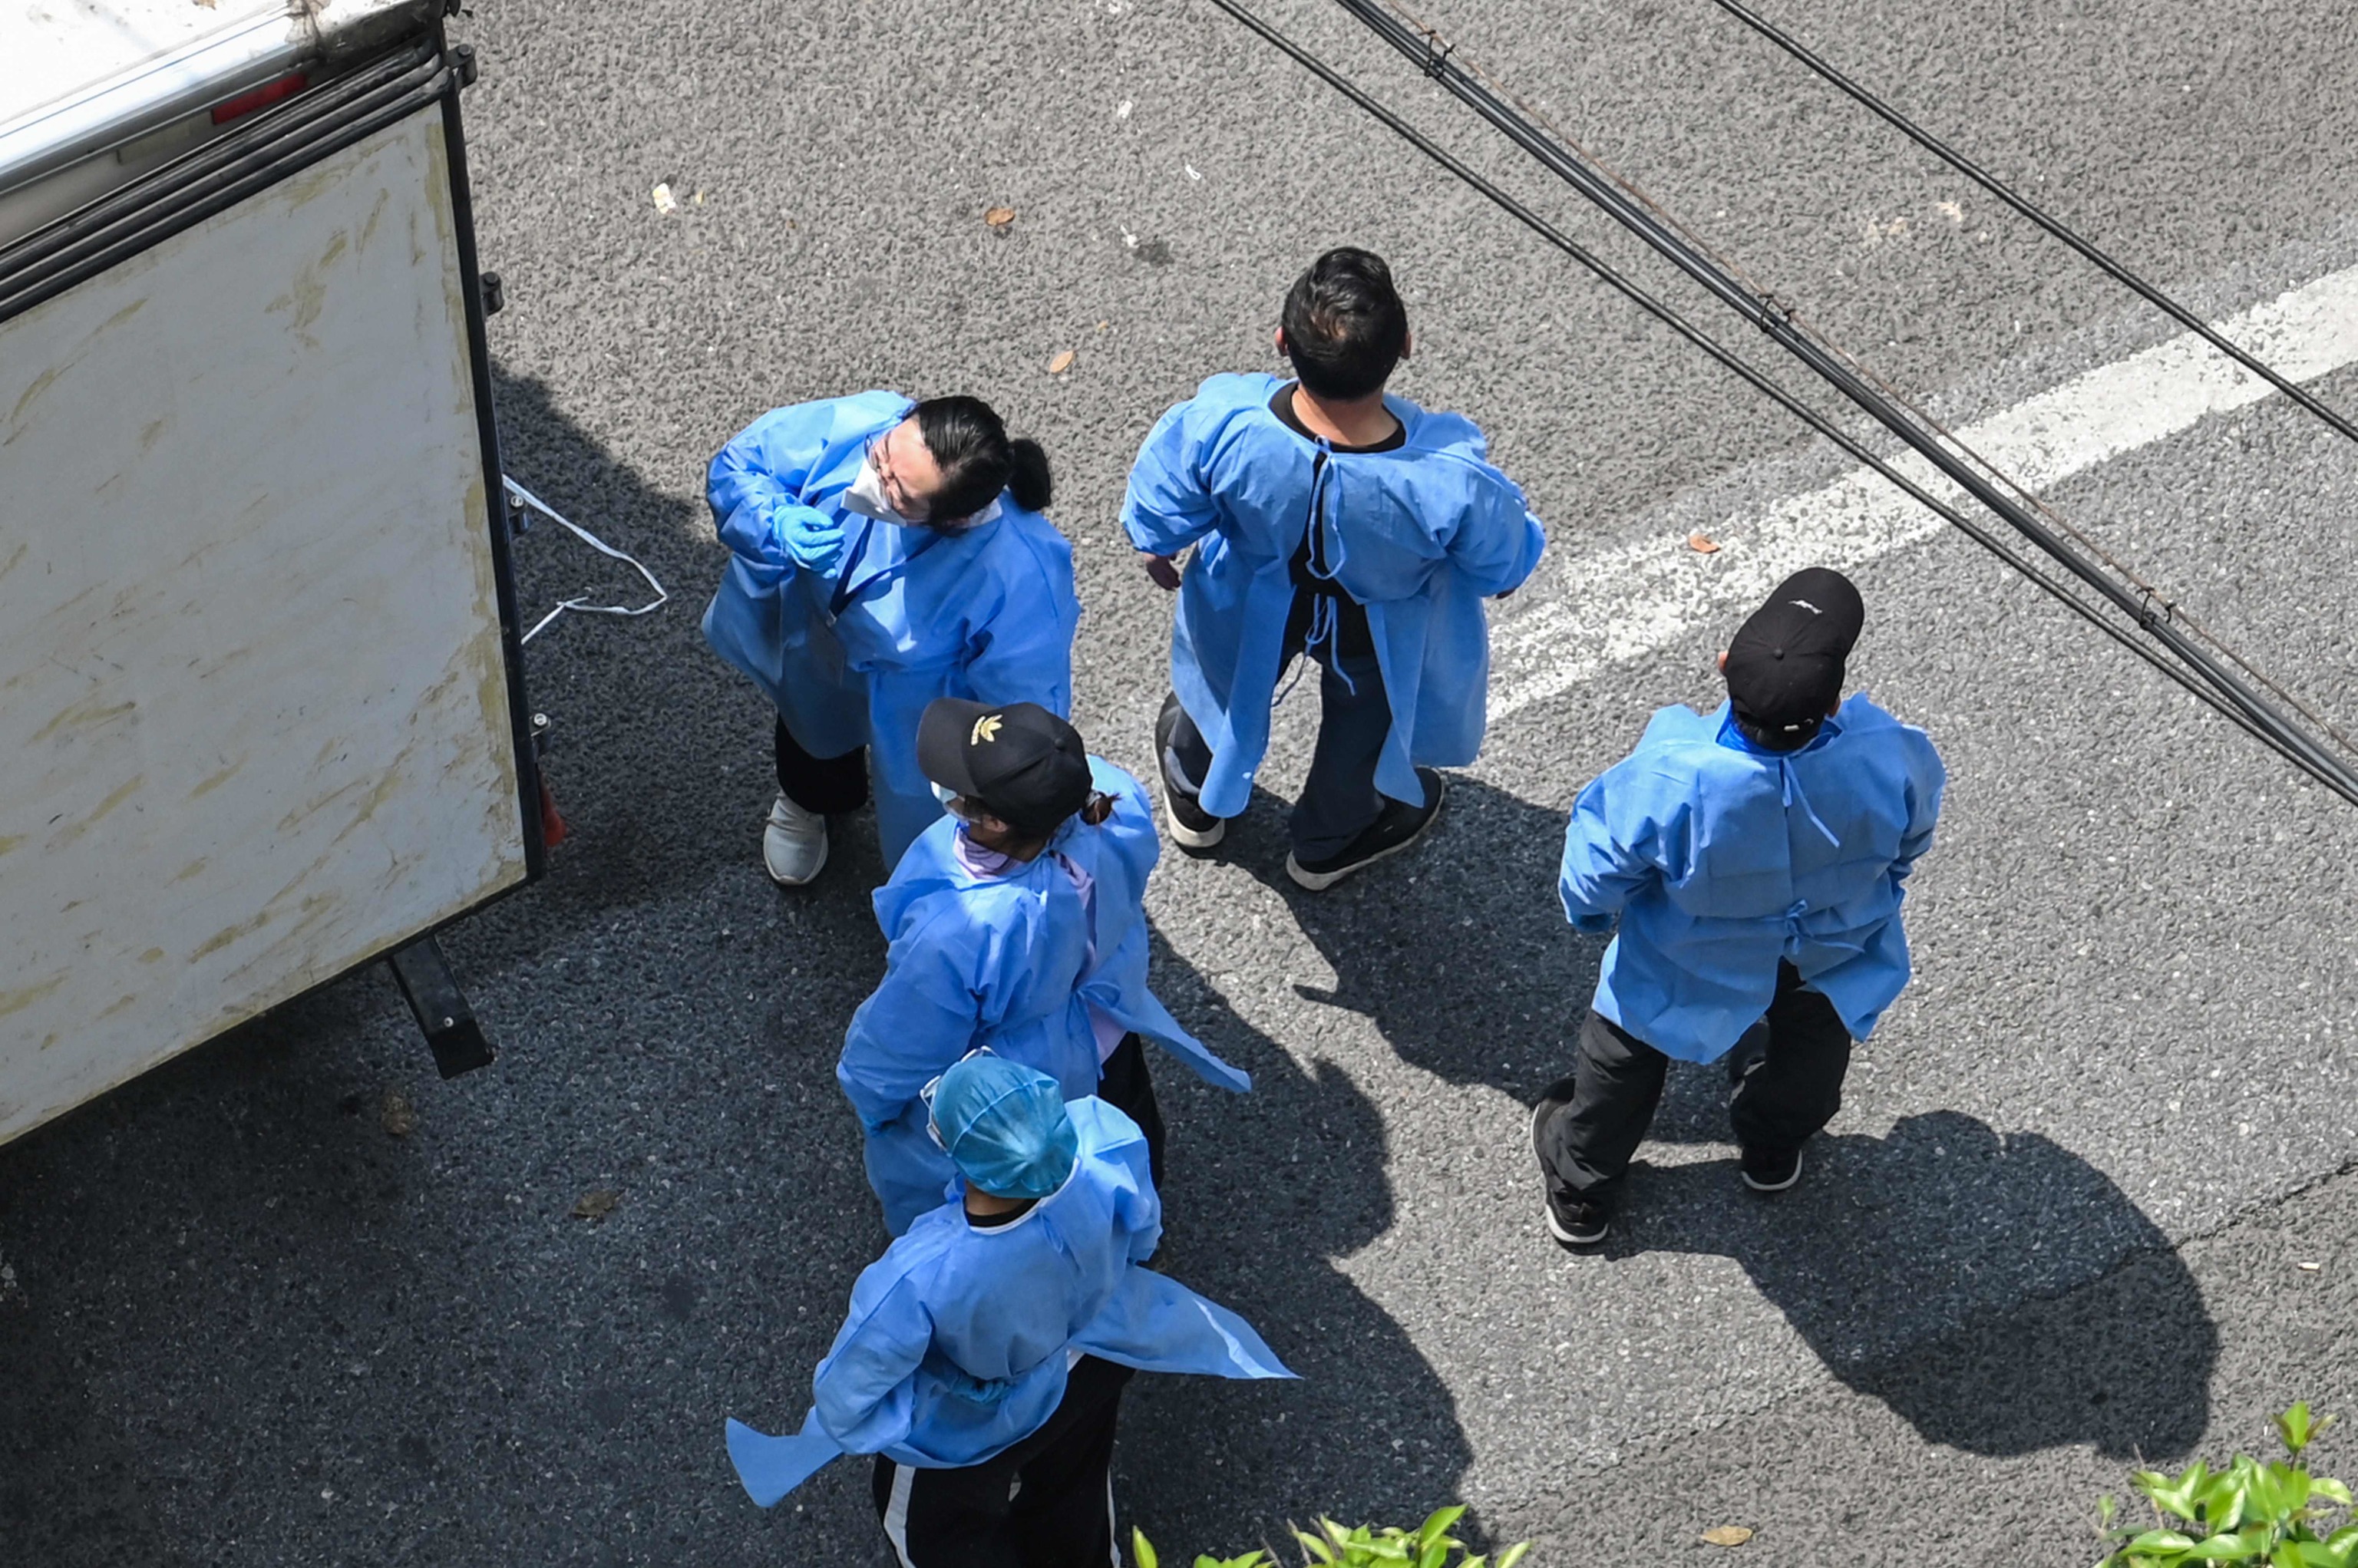 People wearing protective suits unload boxes from a truck in Shanghai.